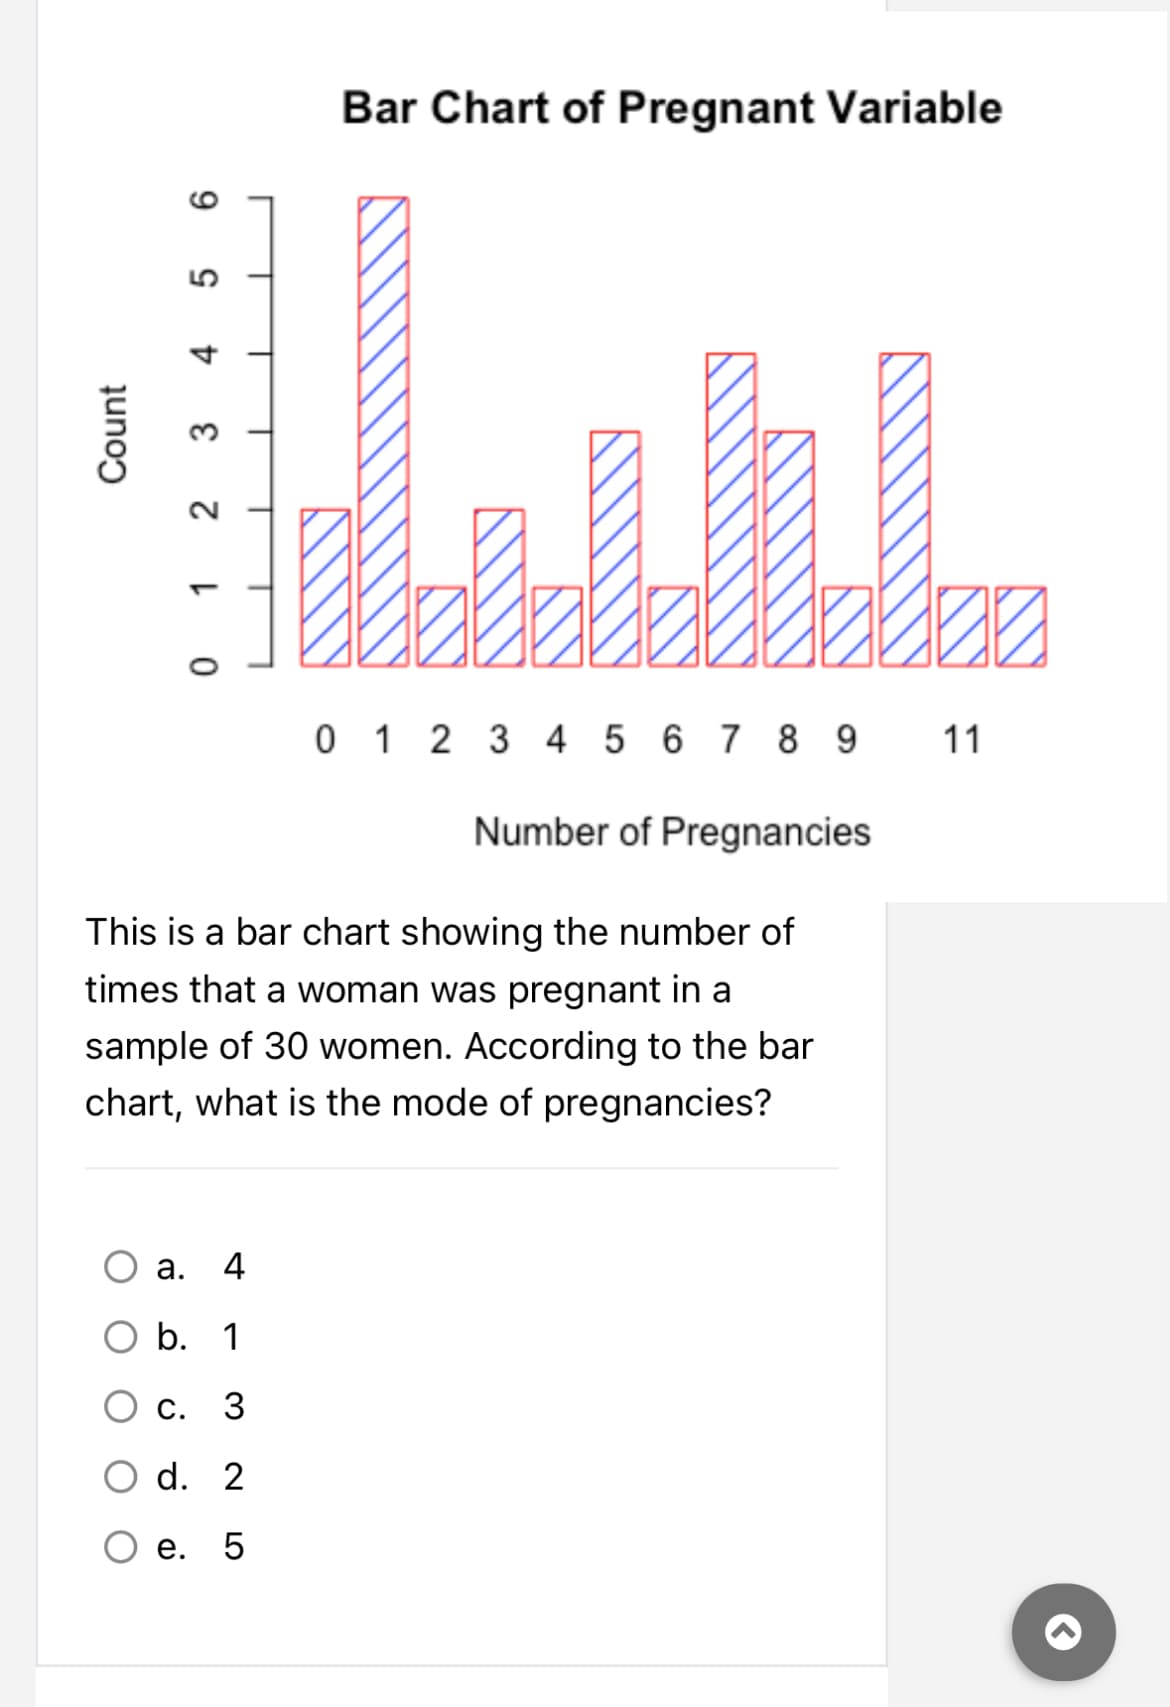 Count
9
4
3
2
1
0
T
O a. 4
b. 1
c. 3
d. 2
e. 5
Bar Chart of Pregnant Variable
thl
0 1 2 3 4 5 6 7 8 9
Number of Pregnancies
This is a bar chart showing the number of
times that a woman was pregnant in a
sample of 30 women. According to the bar
chart, what is the mode of pregnancies?
100
11